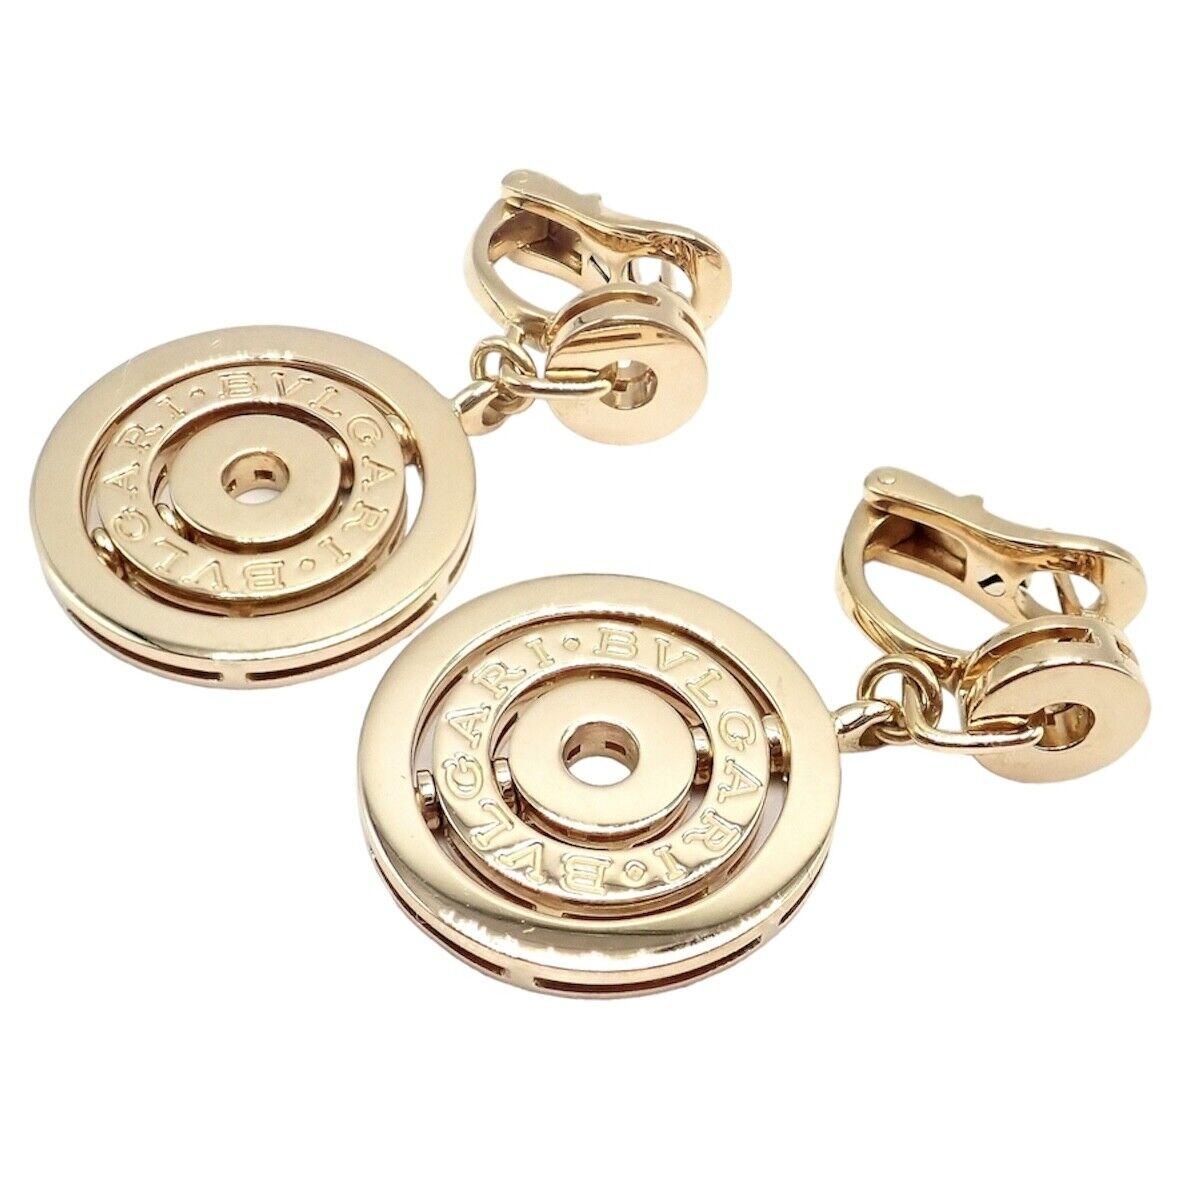 18k Yellow Astrale Cerchi Three Circle Drop Earrings by Bulgari.
These earrings are made for pierced ears.
Details:
Weight: 22.7 grams
Measurements: Main Circle: 21mm
Total Length: 34mm
Stamped Hallmarks: Bulgari Made in Italy 750 
*Free Shipping